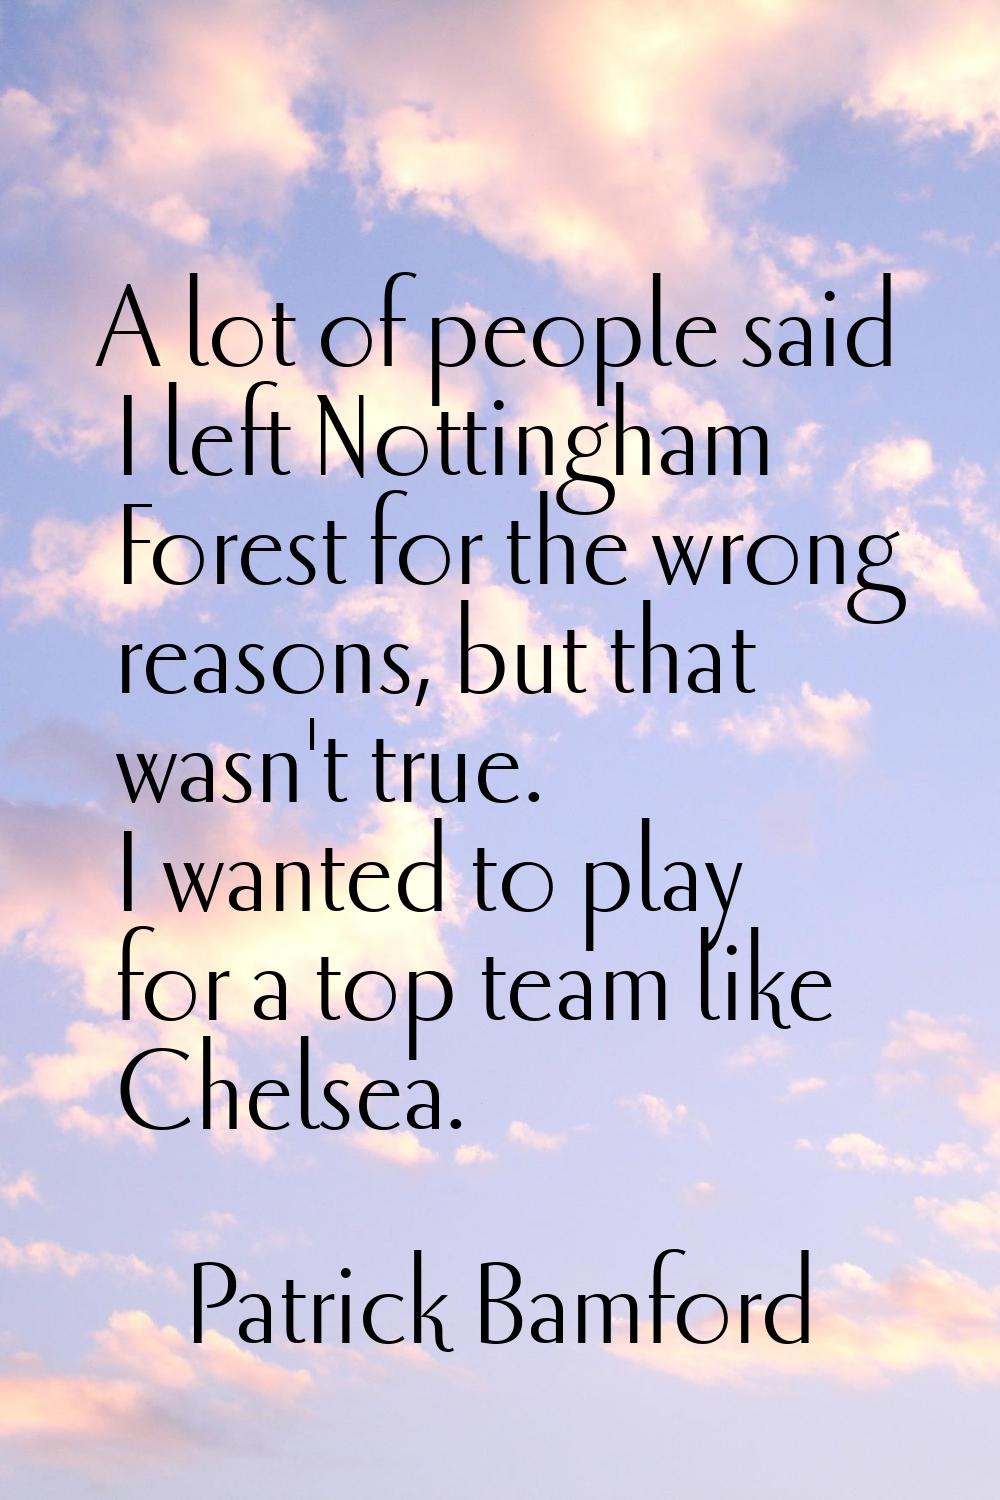 A lot of people said I left Nottingham Forest for the wrong reasons, but that wasn't true. I wanted